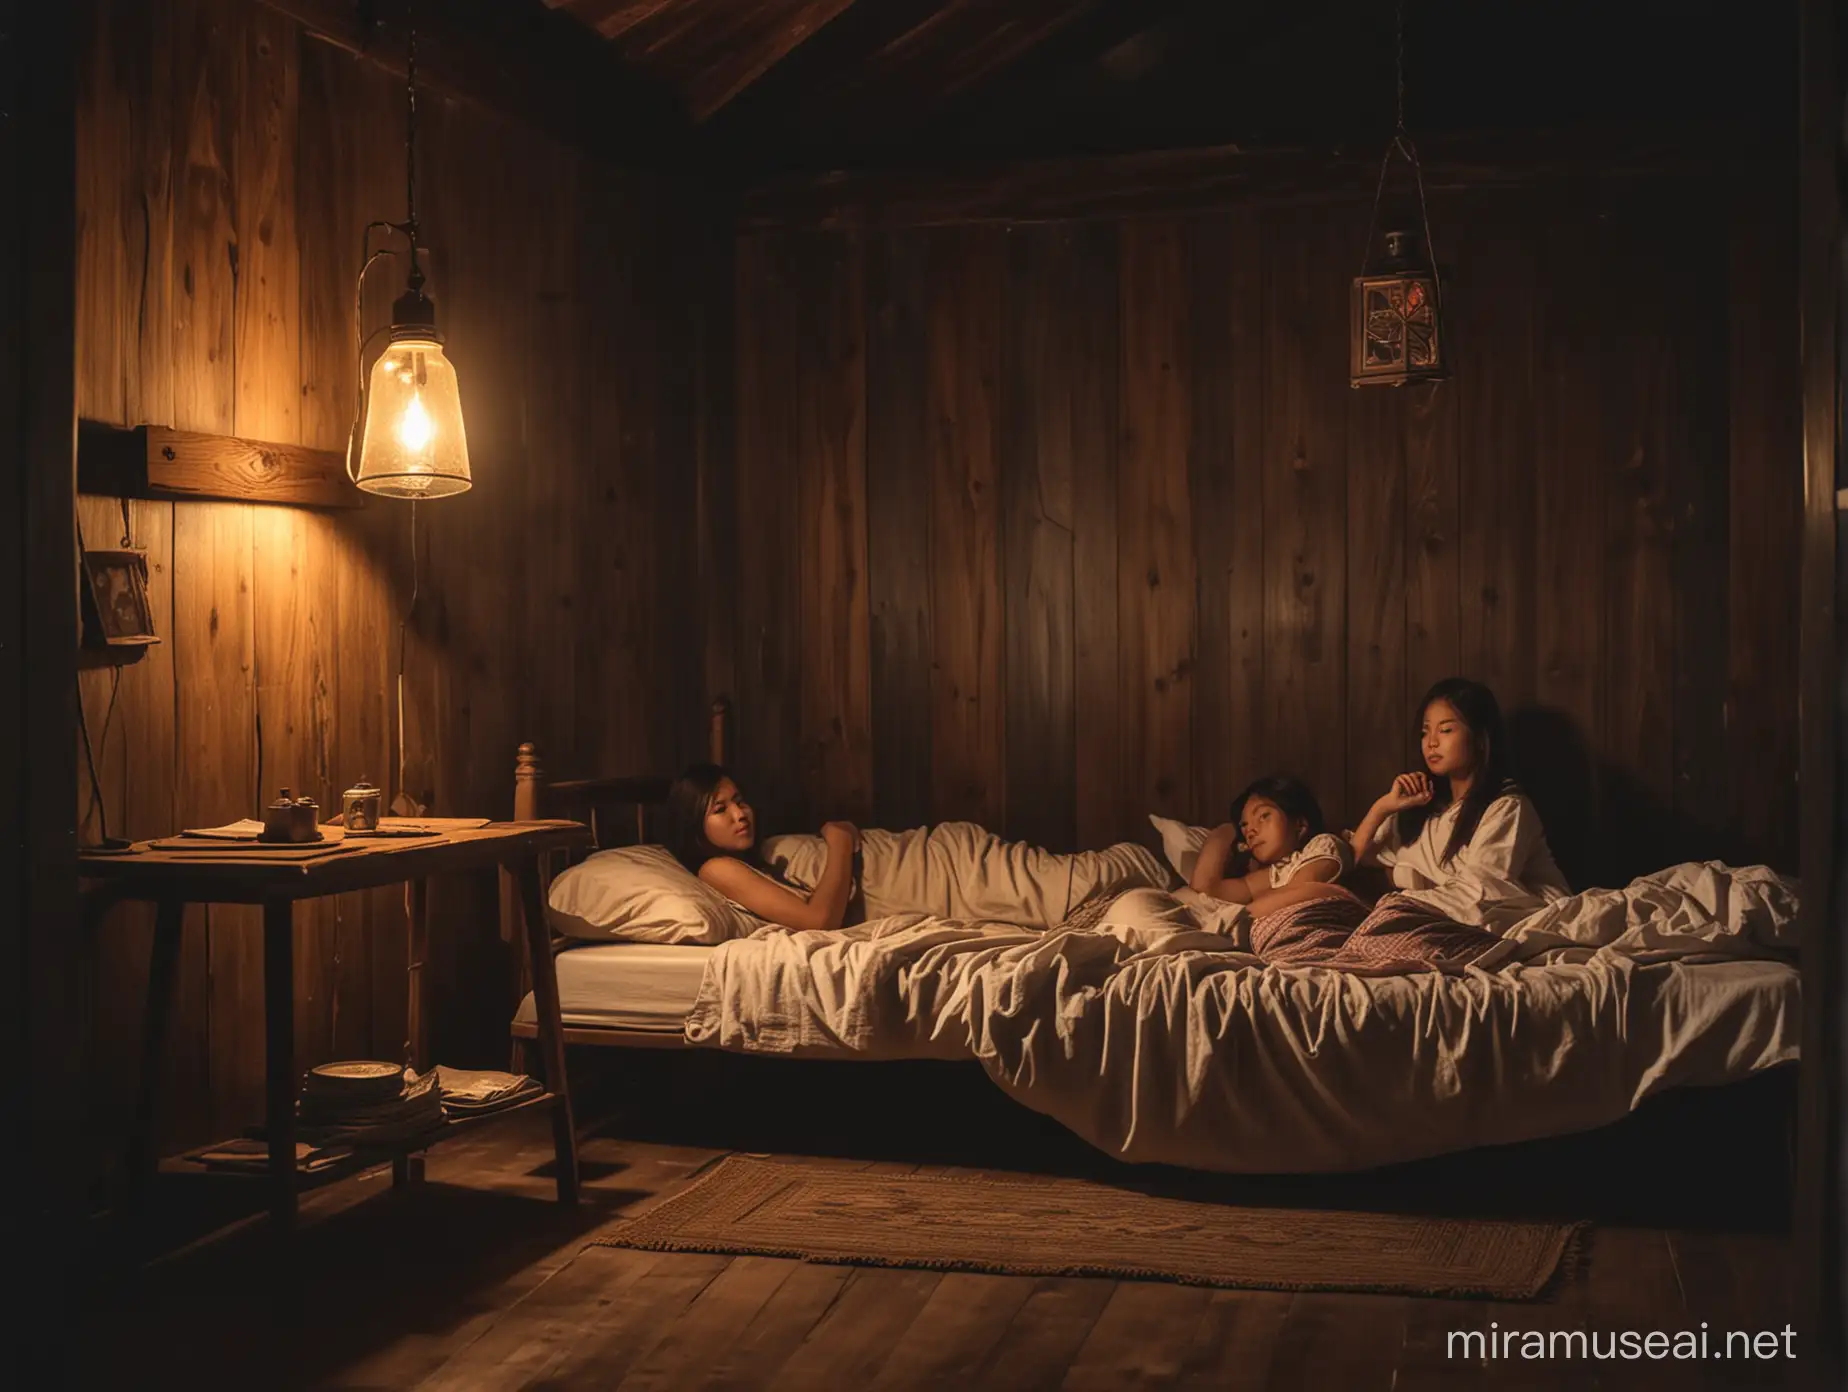 Two young Filipinas having a friendly slumber party in a simple provincial house with old wooden walls and floor, an antique kerosine lamp dimly lights the bedroom, dark, cinematic